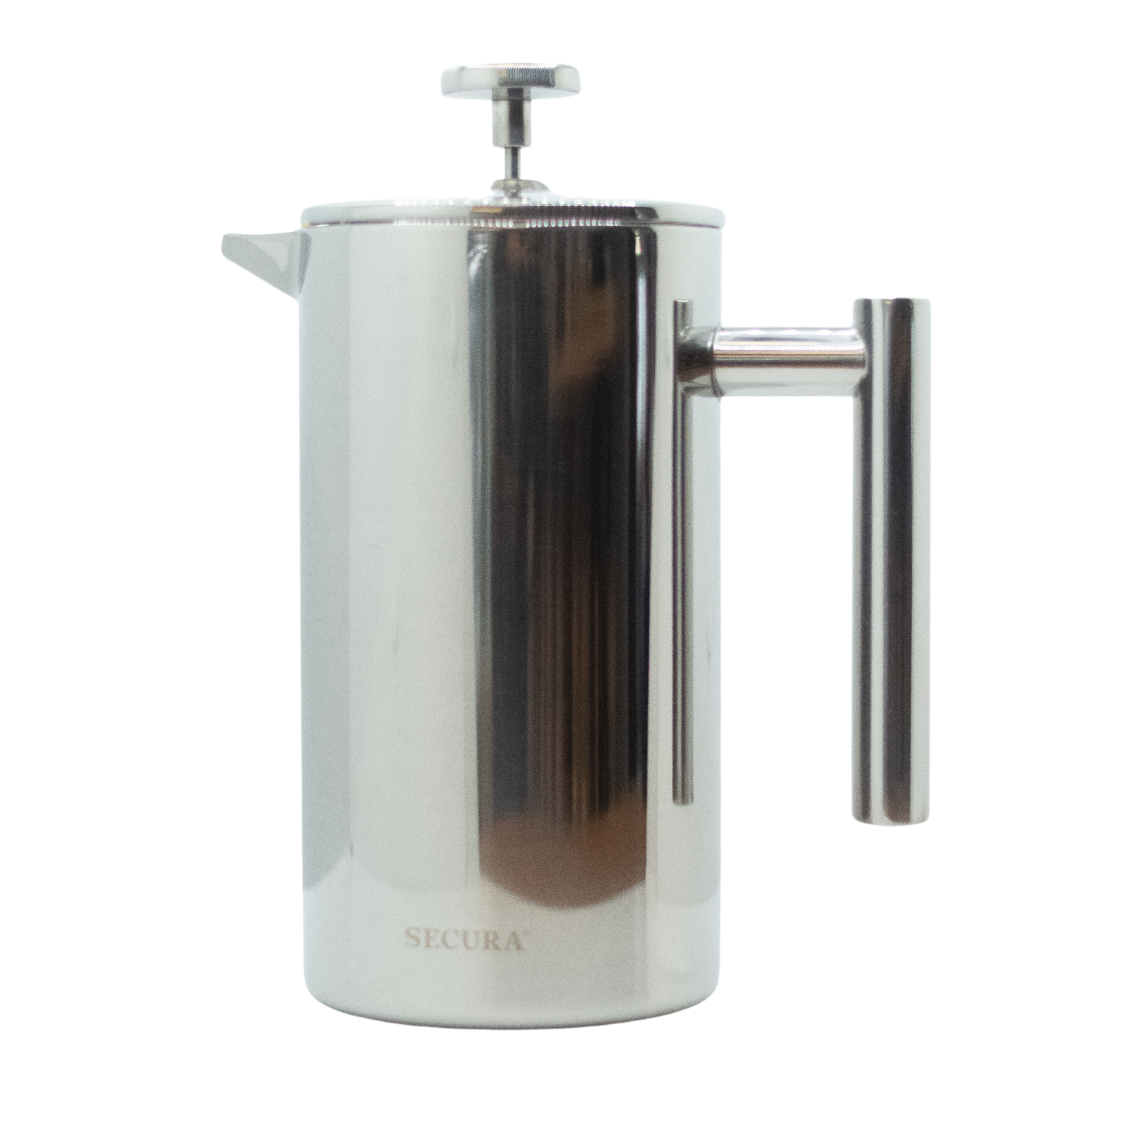 French Press Stainless Steel